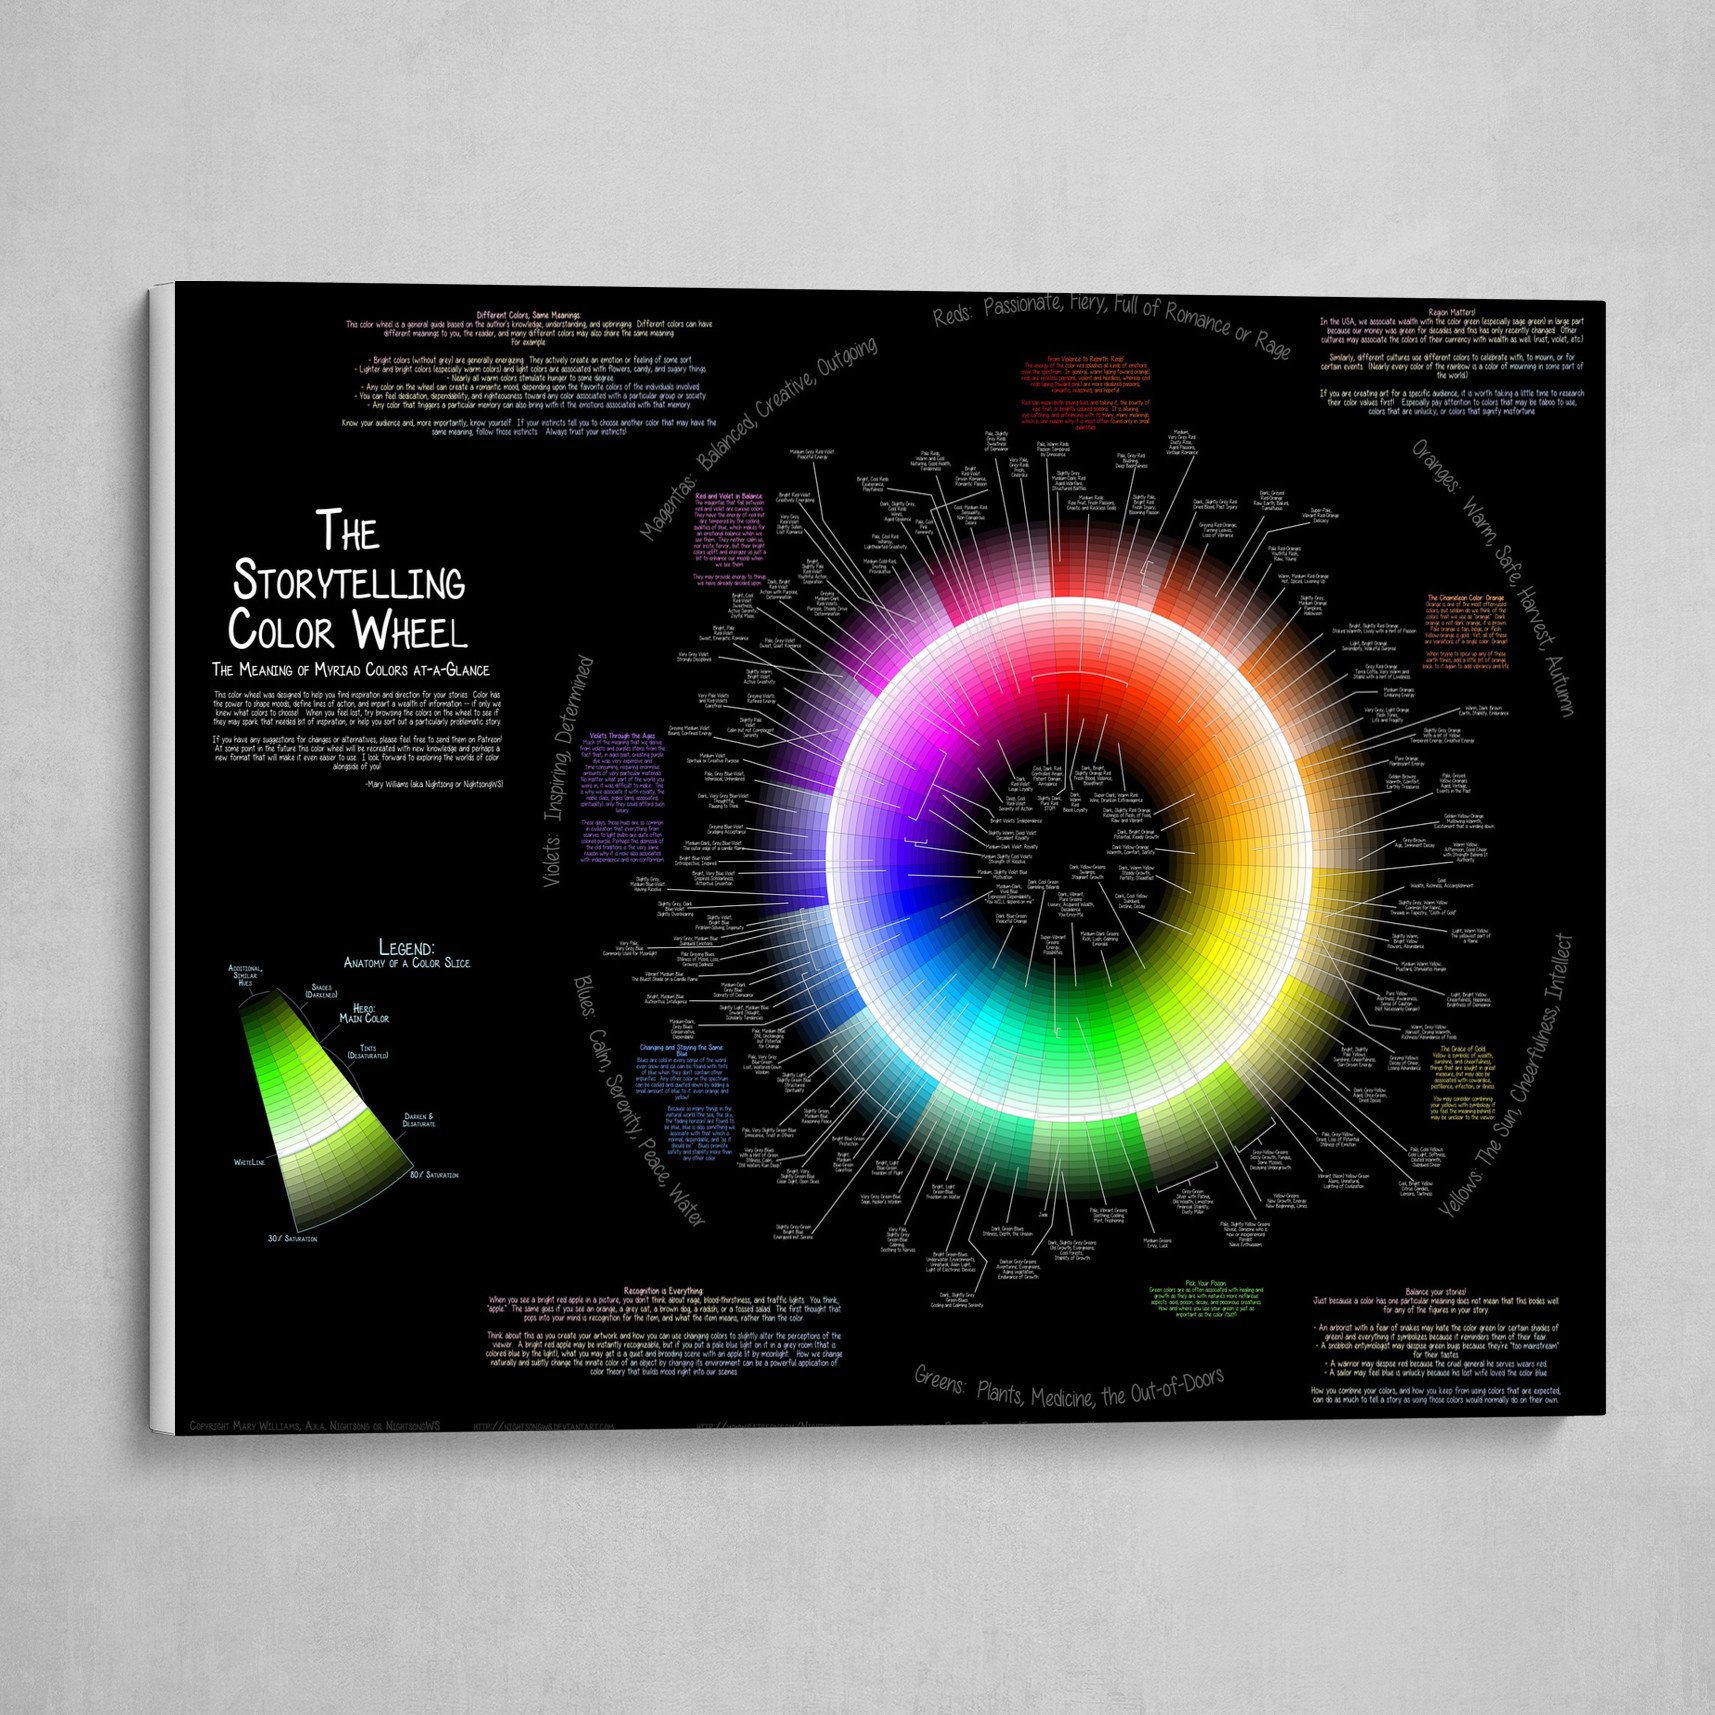 The Storytelling Color Wheel